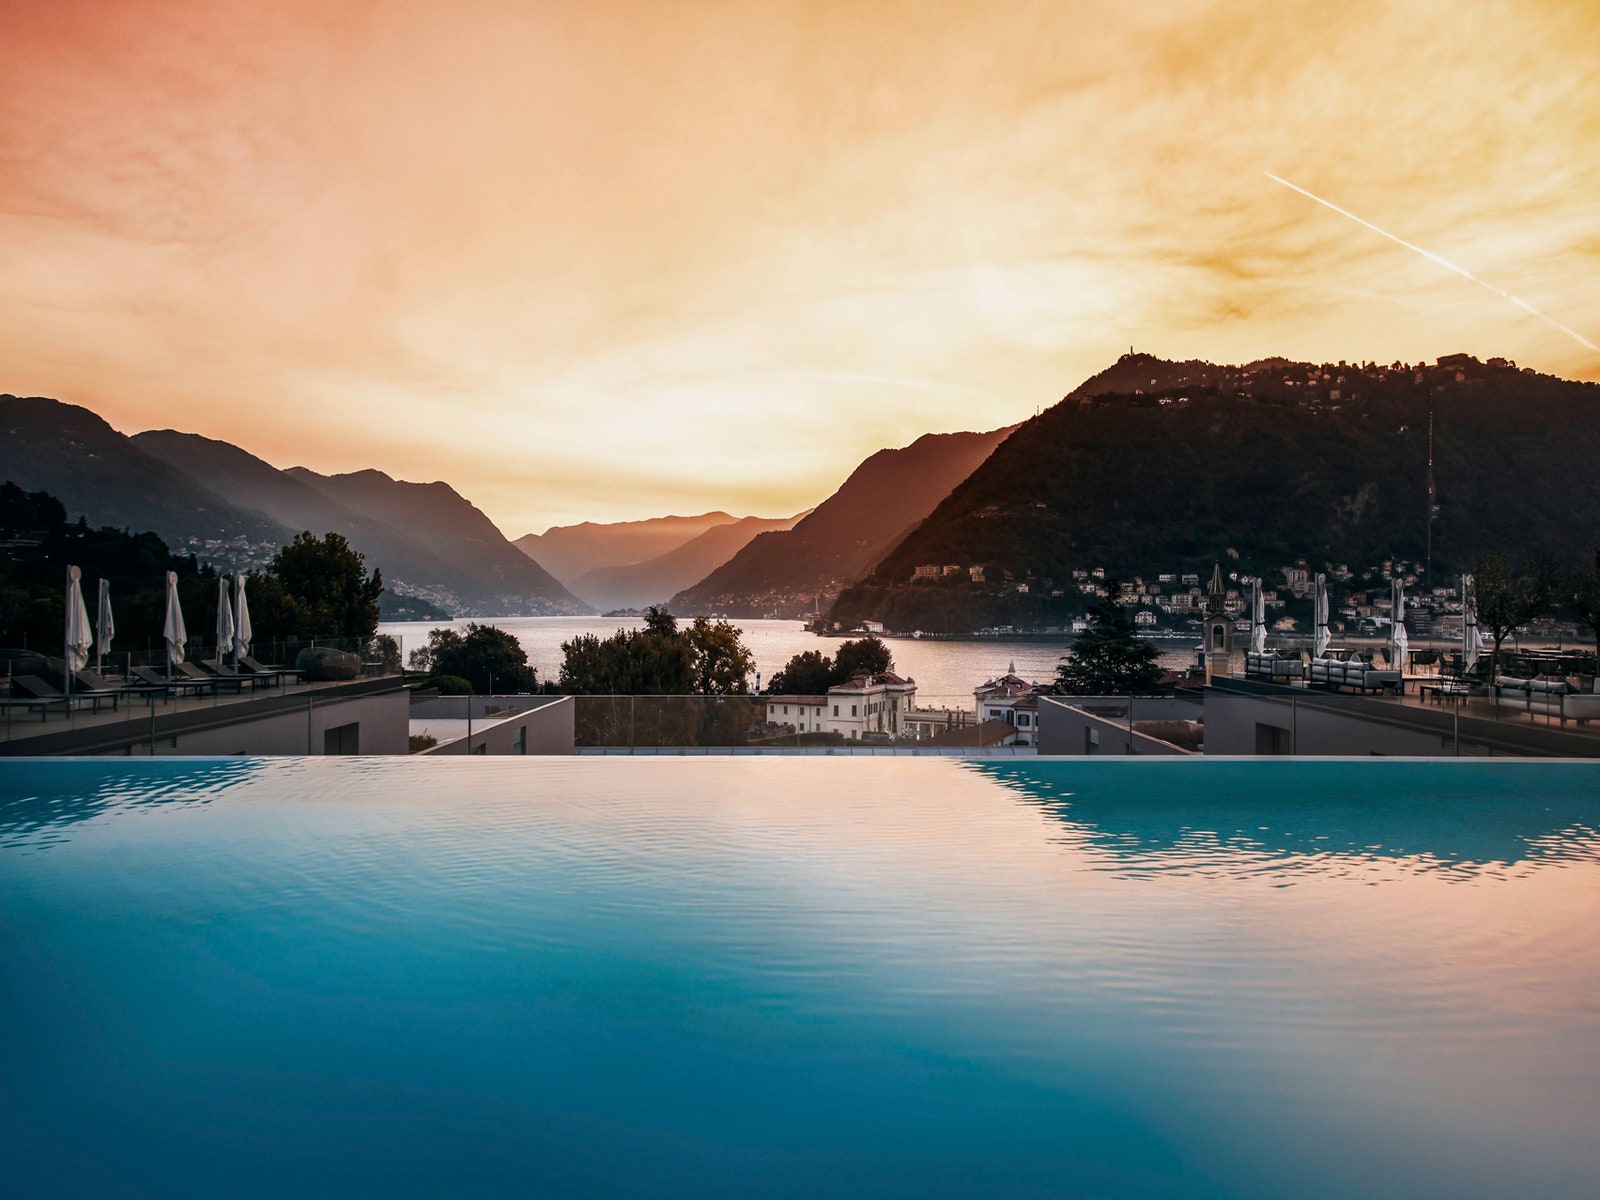 This hotel has the best views in Lake Como